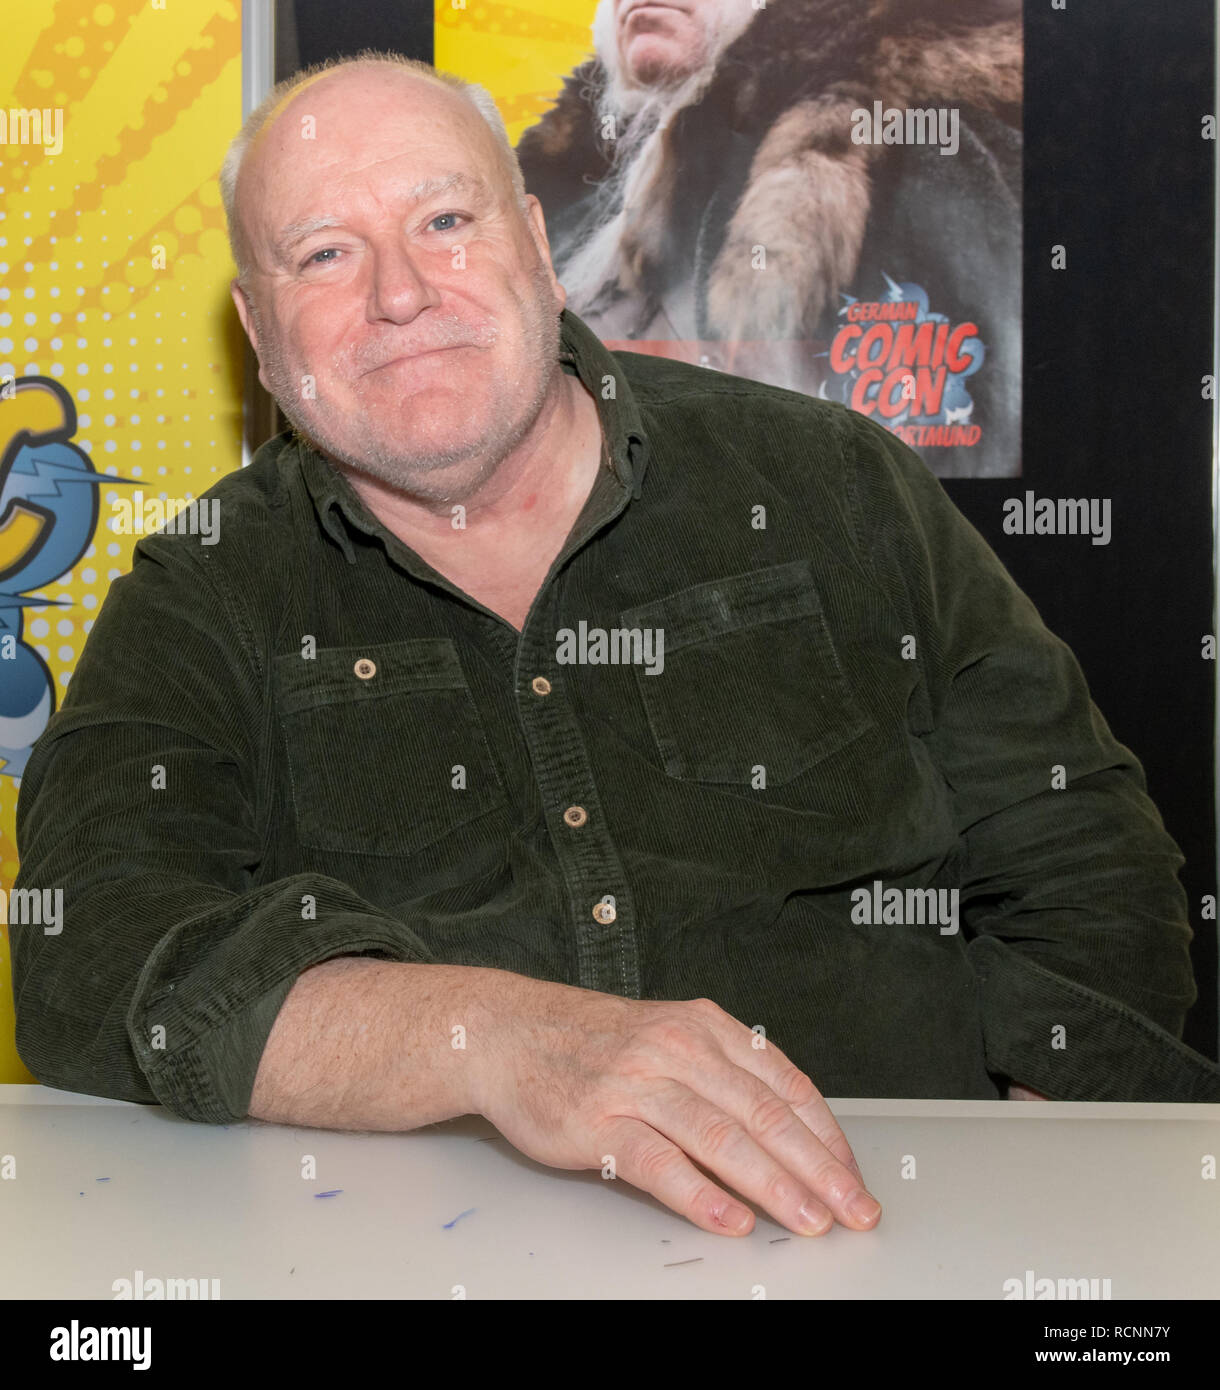 DORTMUND, GERMANY - December 1st 2018: Ron Donachie (*1956, actor) at German Comic Con Dortmund, a two day fan convention Stock Photo